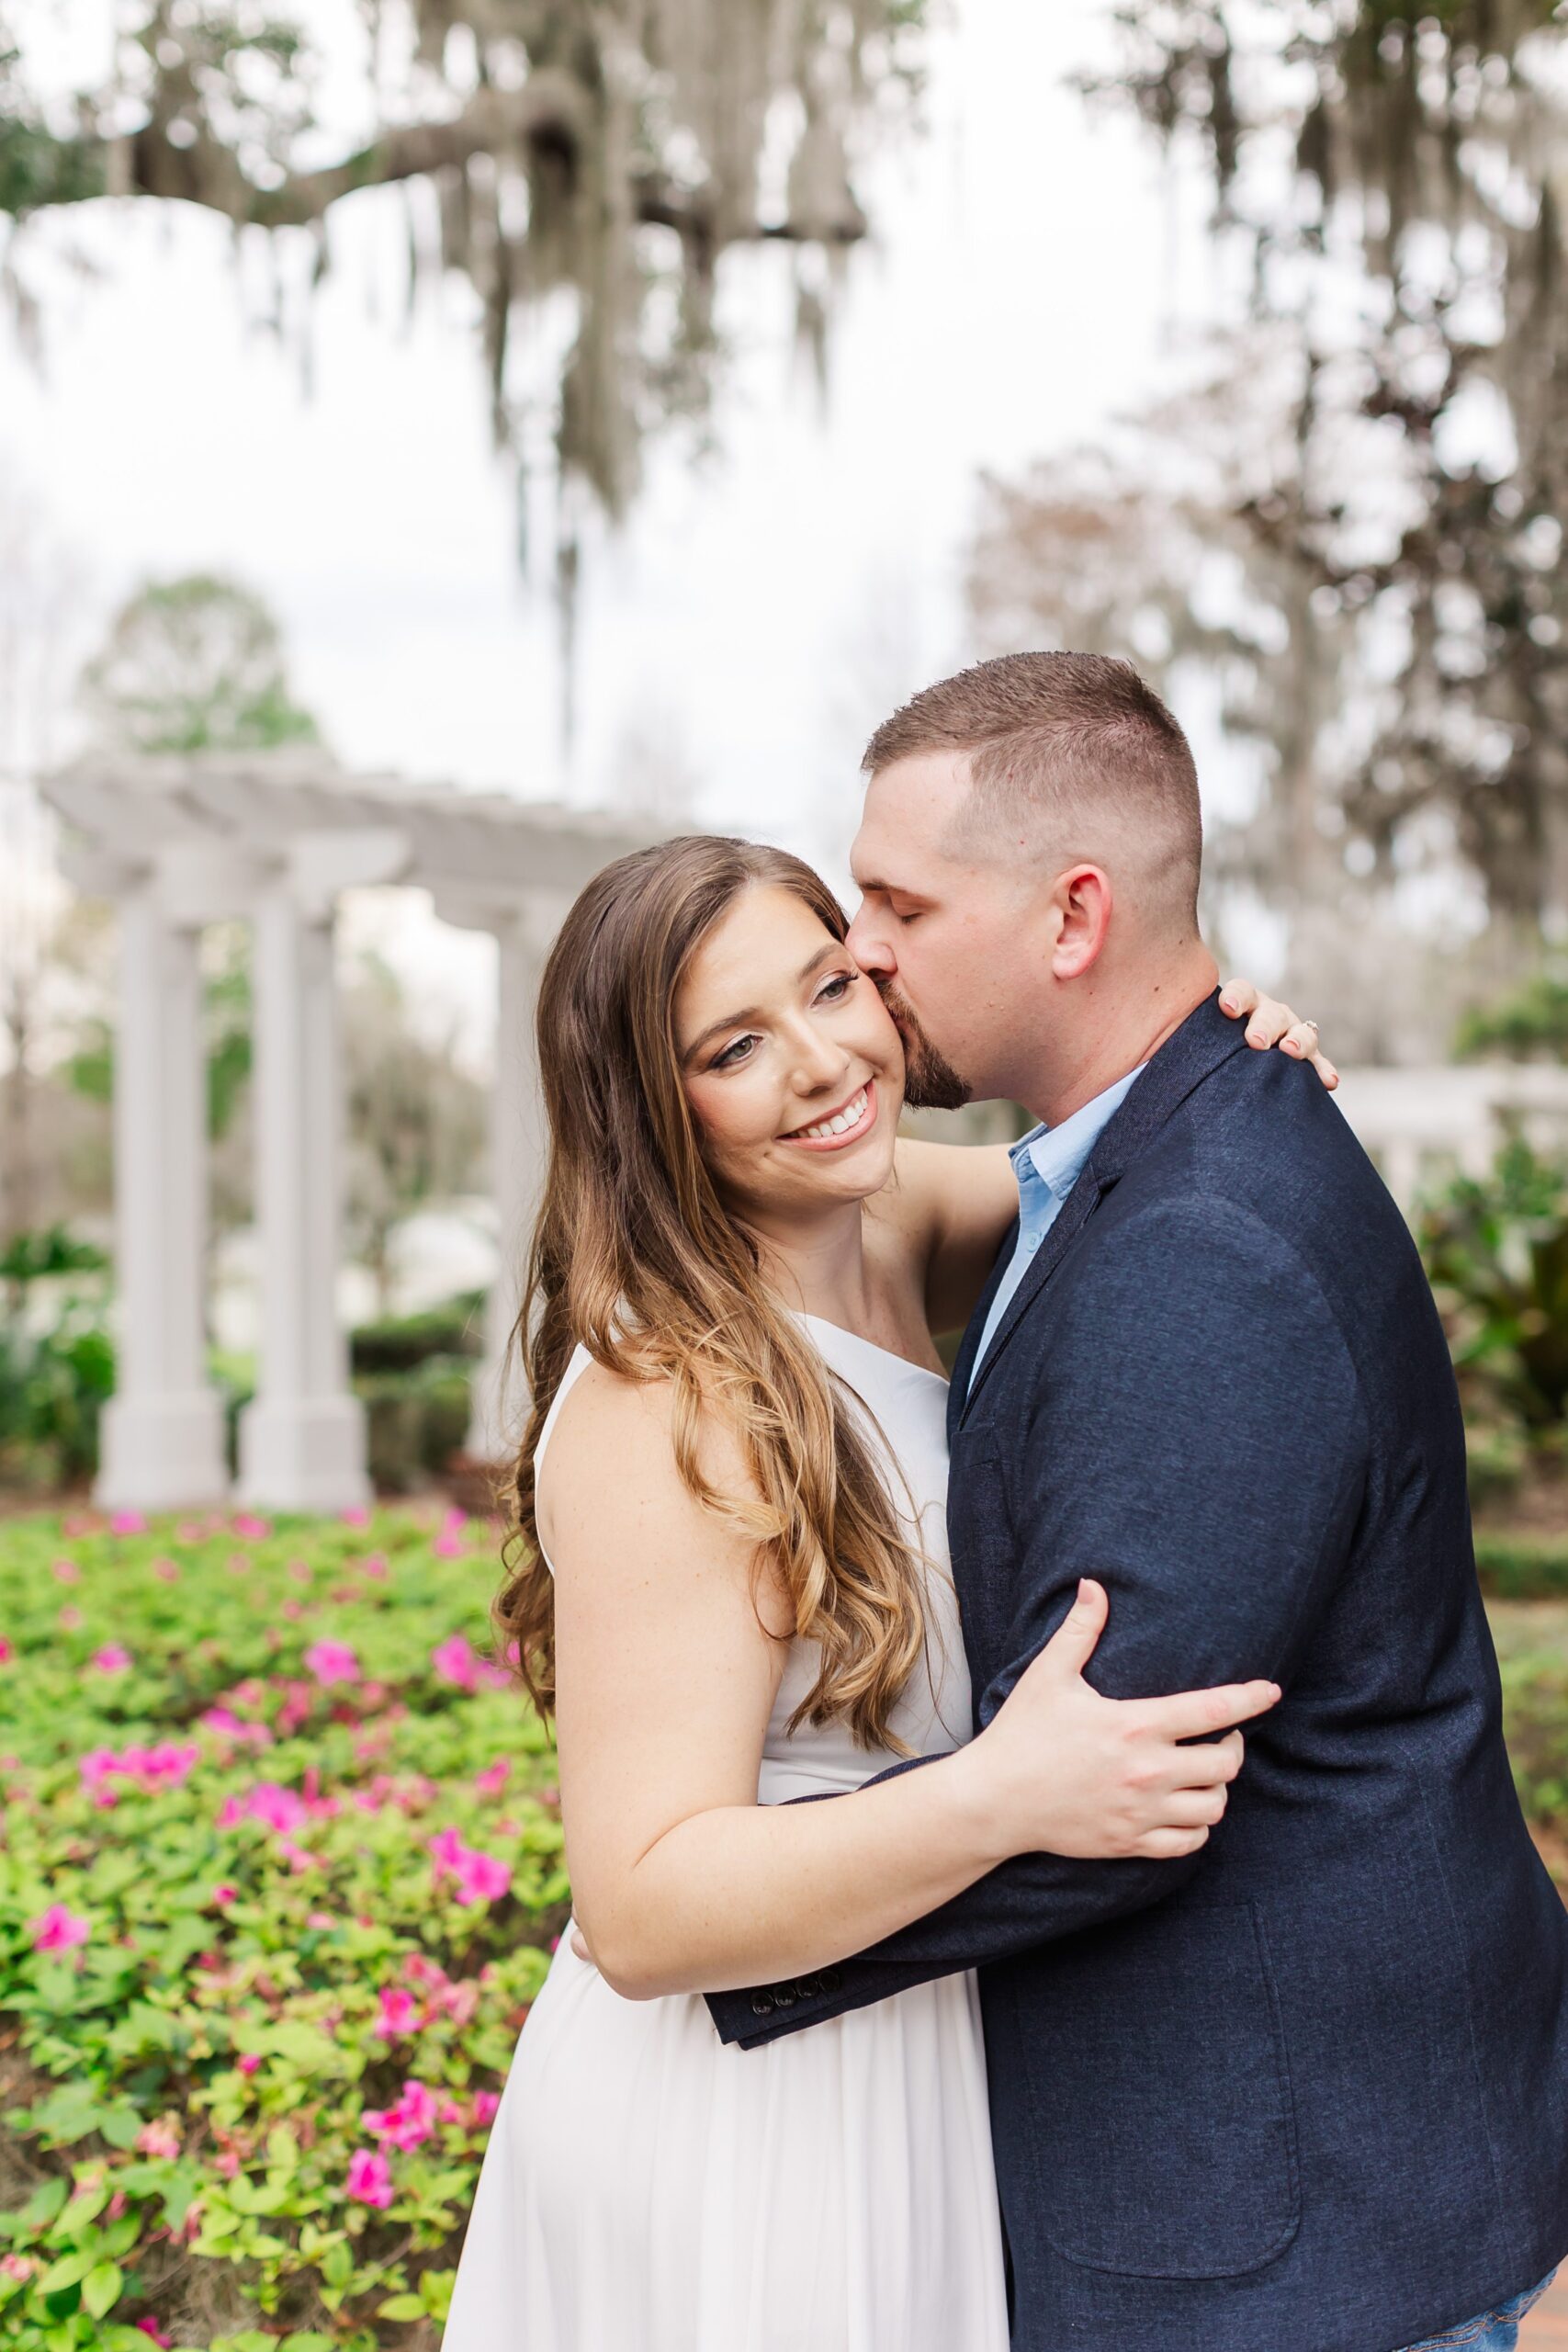 Guys kisses girl's cheek in front of beautiful spanish moss and flowers for their Orlando Engagement Photos at Cypress Grove Park in Orlando